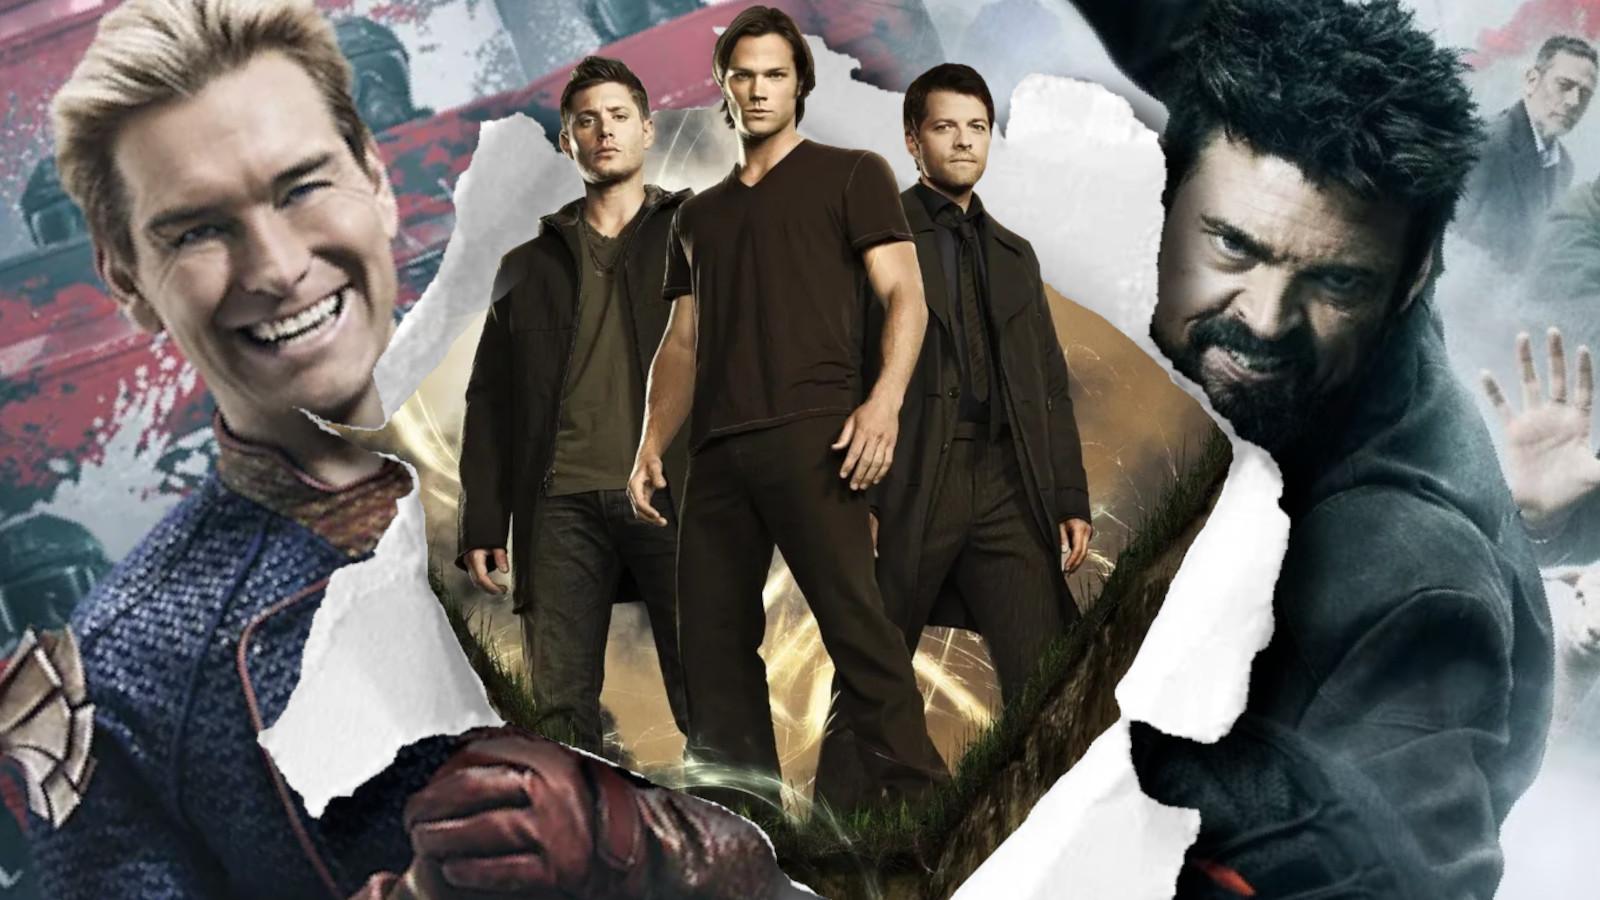 Billy Butcher and Homelander are in the bacground while through a hole torn in the poster the cast of Supernatural (Dean, Sam and Castiel) look through.